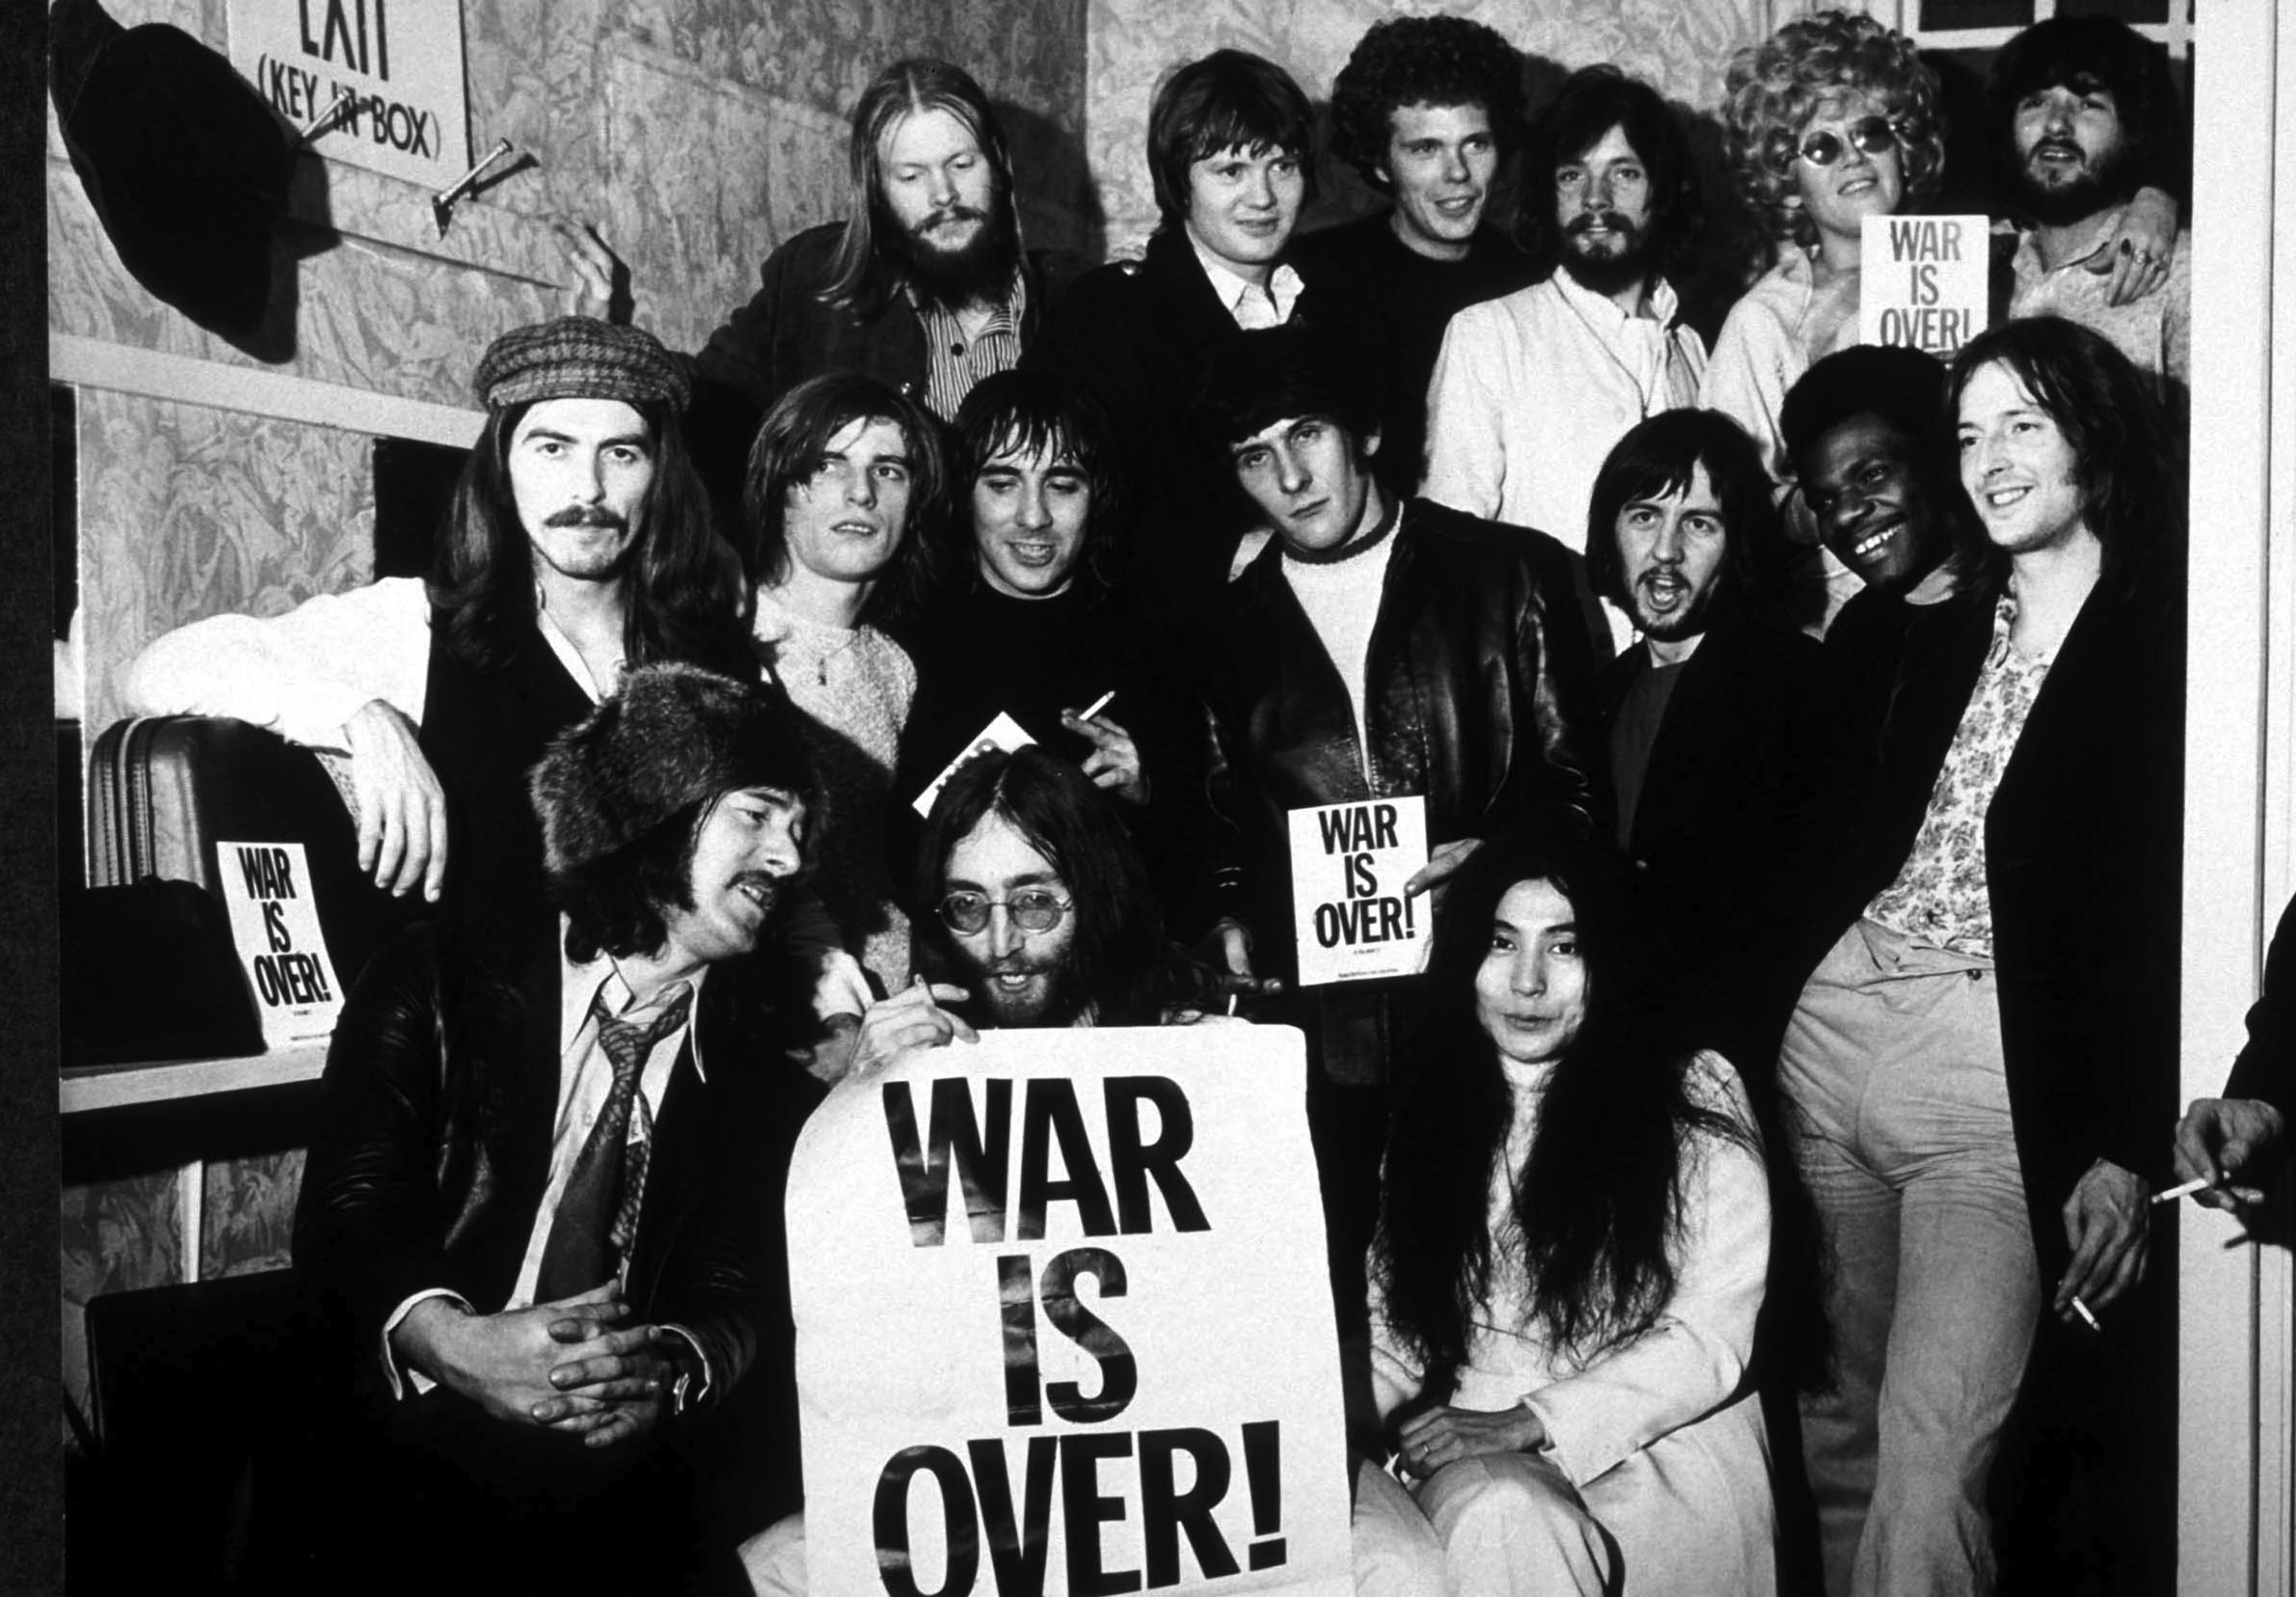 Unknown Black and White Photograph - John Lennon Group "War is Over" Fine Art Print